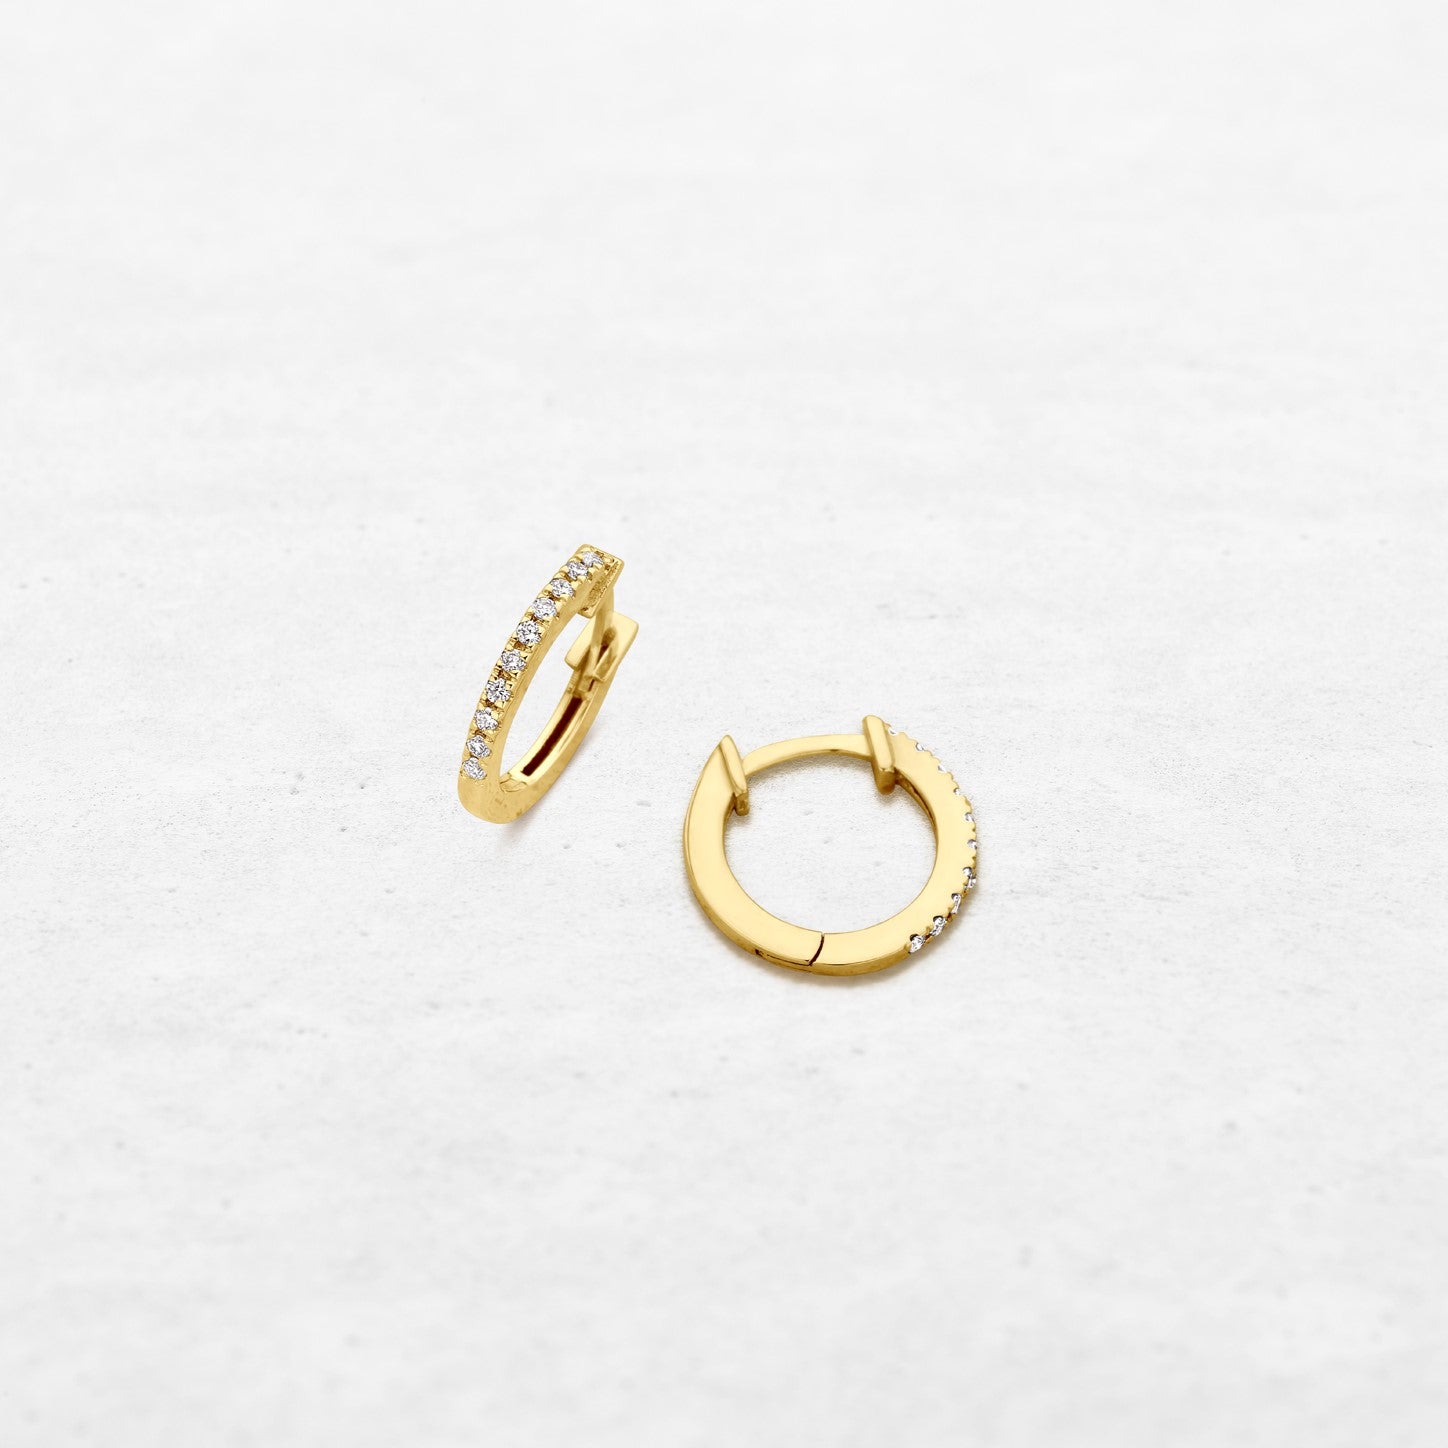 Hoop earring with diamonds in yellow gold by O! Jewelry